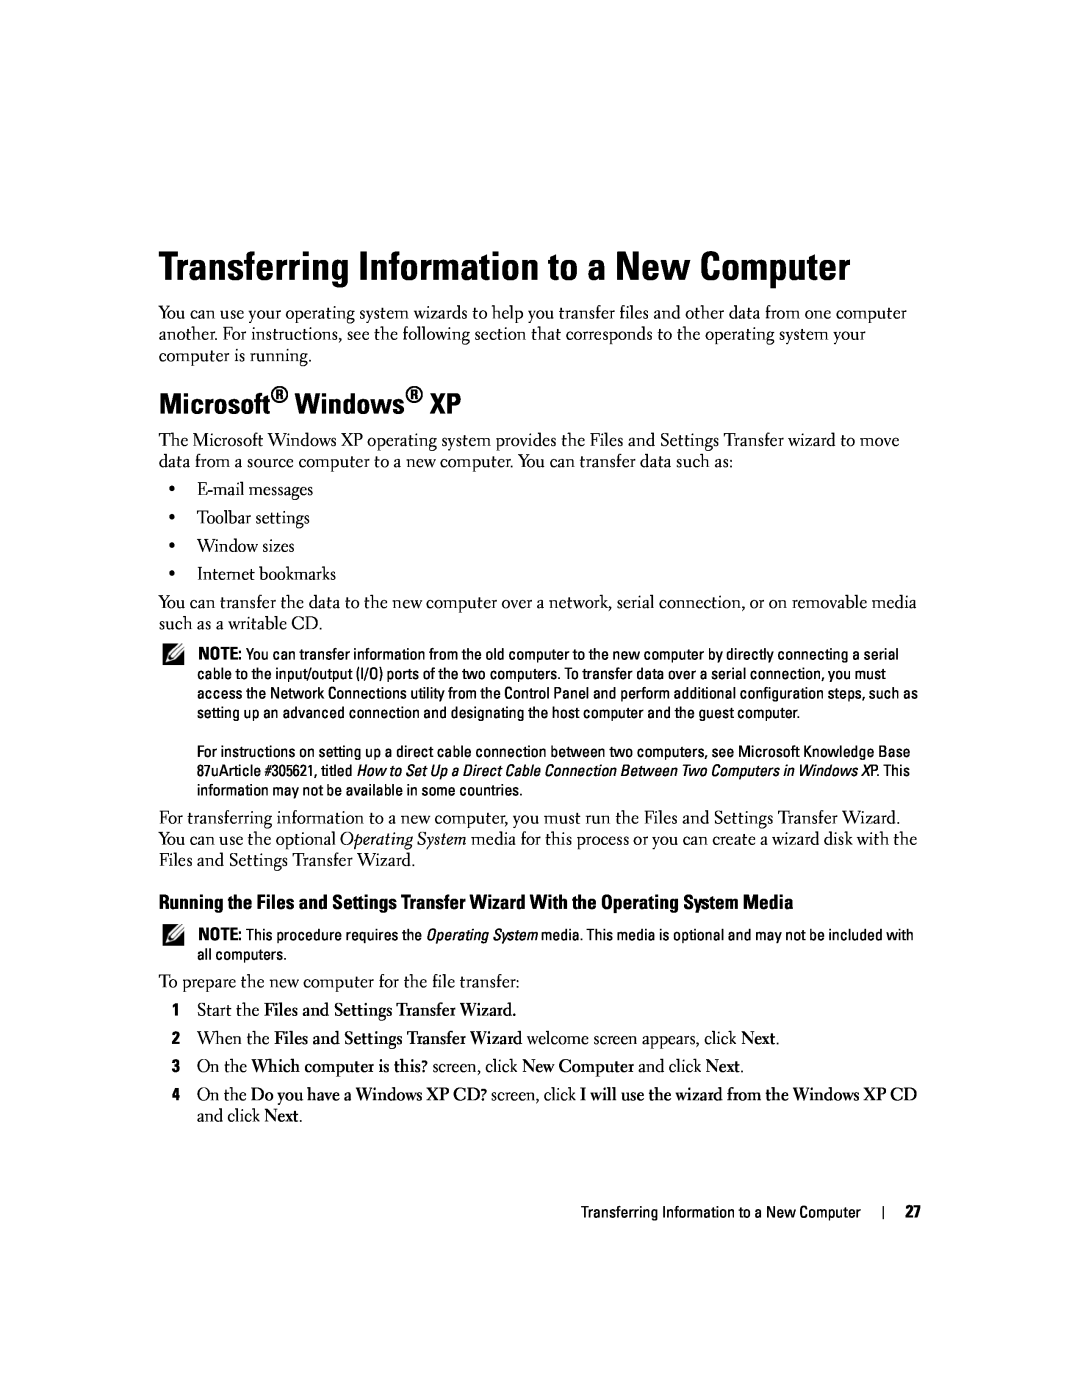 Dell PP24L manual Transferring Information to a New Computer, Microsoft Windows XP 